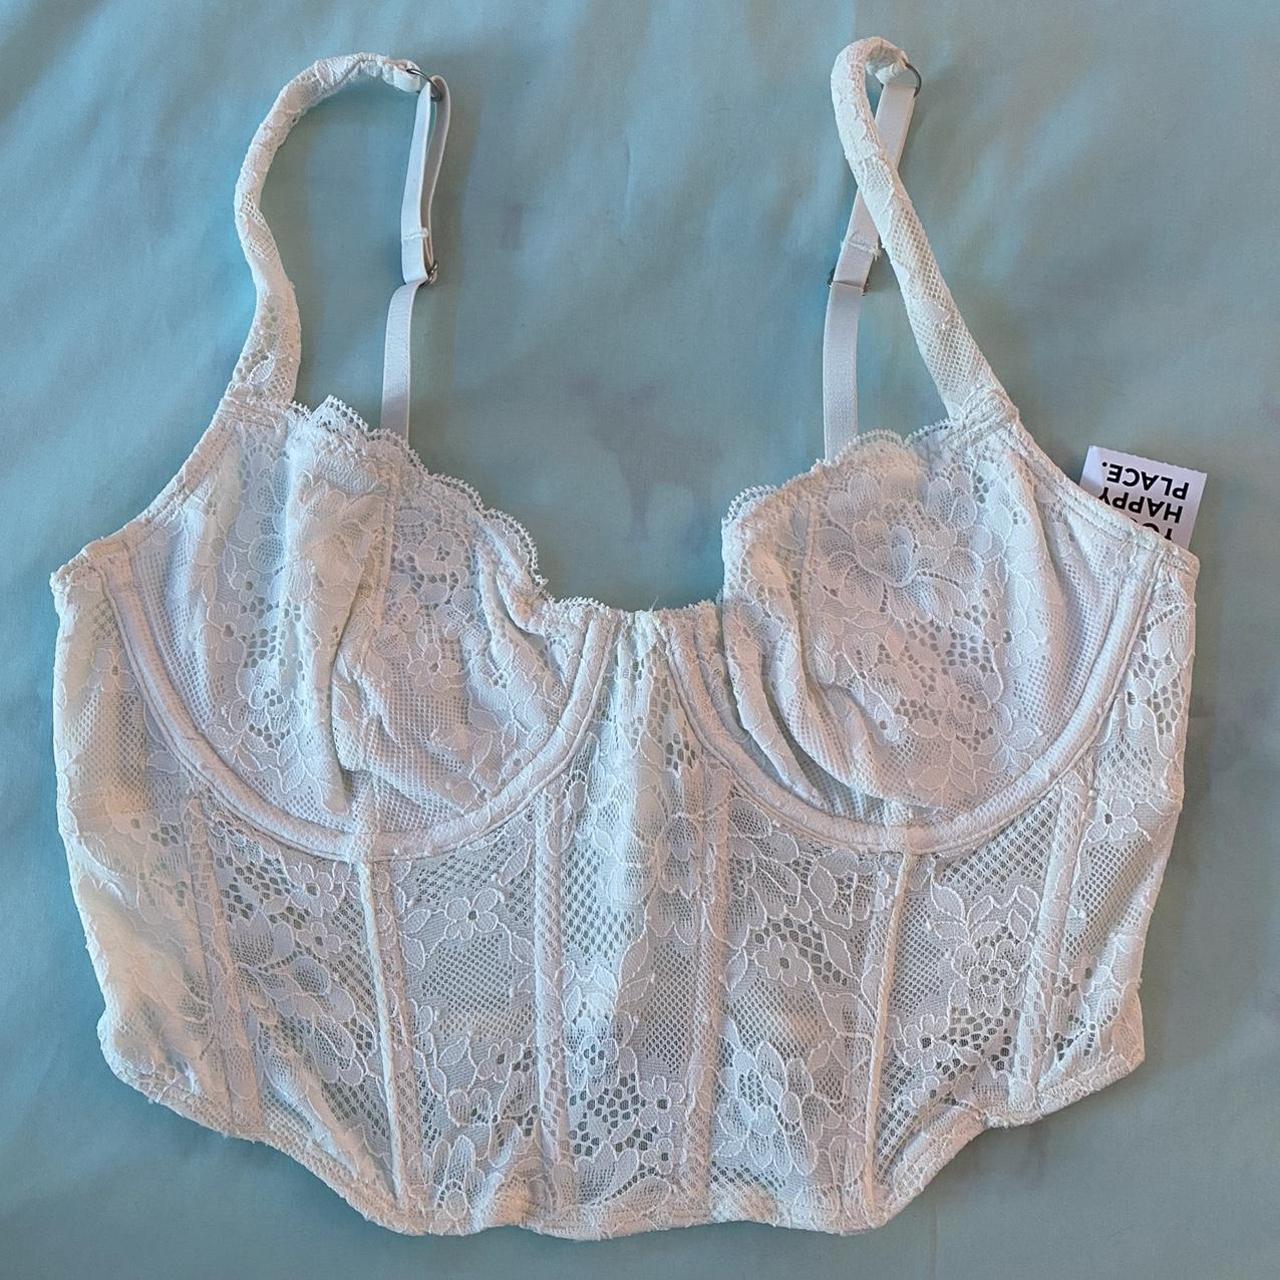 Gilly Hicks Lace Corset Bra Top - SEND OFFERS! - - Depop